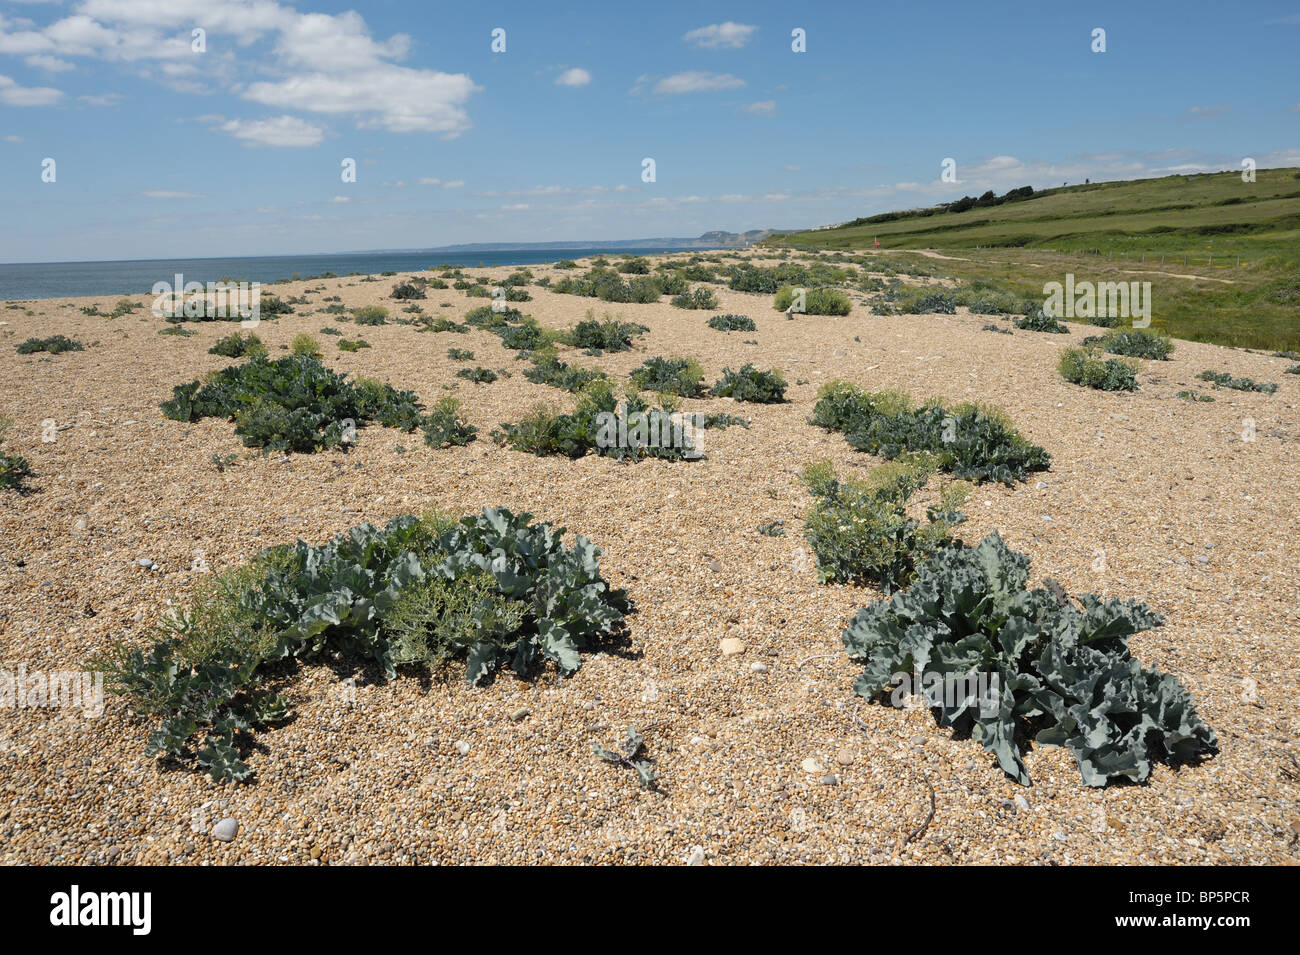 Sea kale and other vegetation growing in shingle on Chesil Beach, Dorset Stock Photo